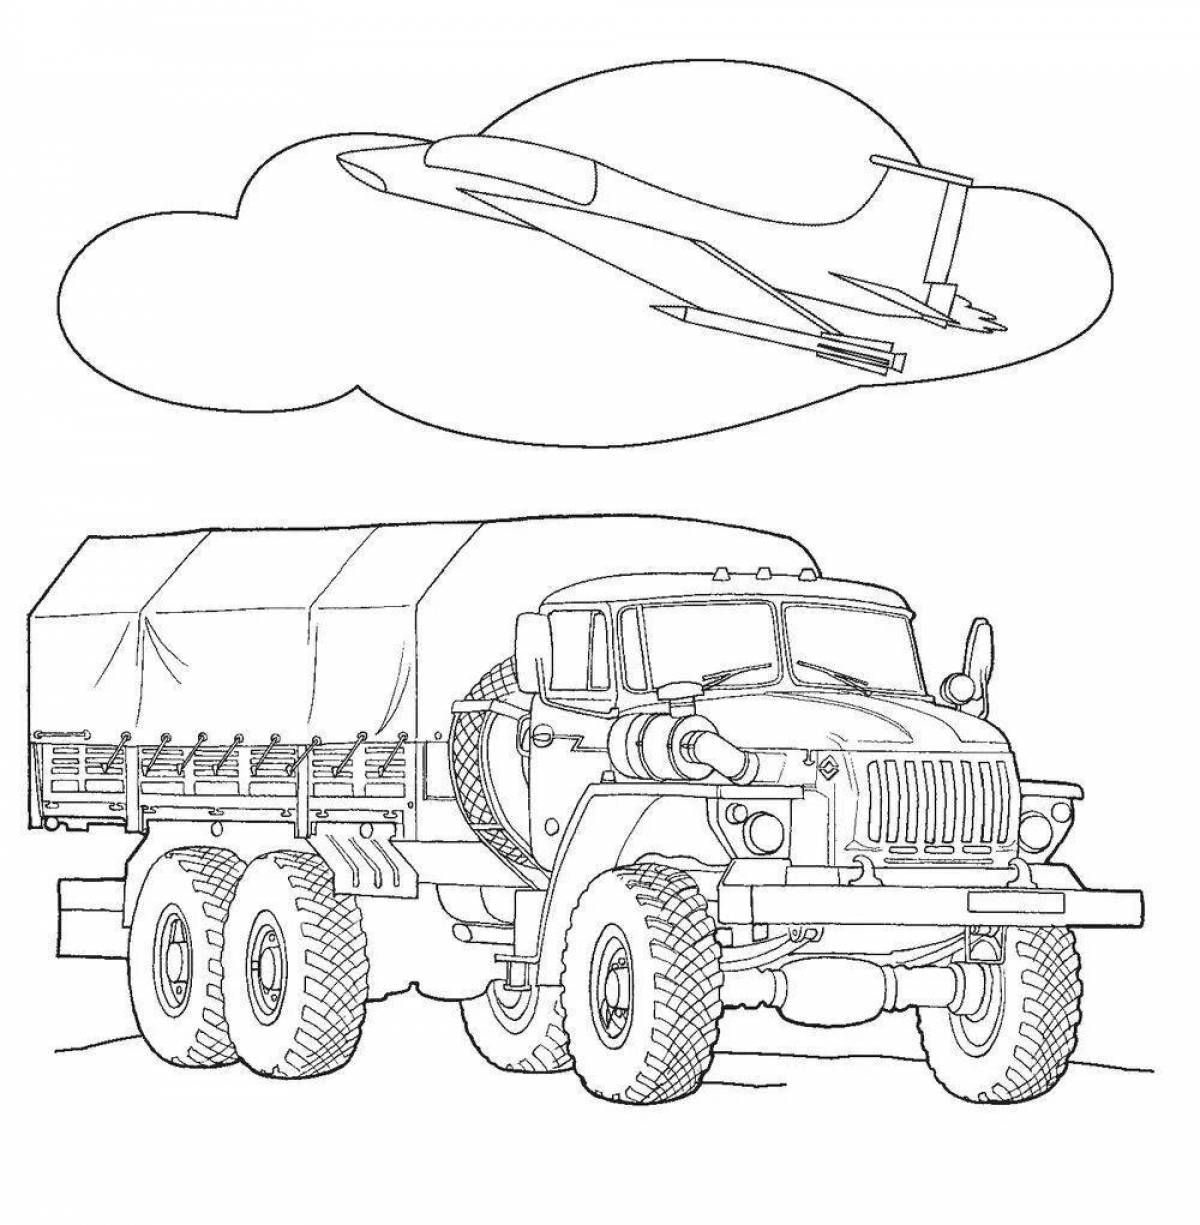 Majestic military truck coloring book for kids